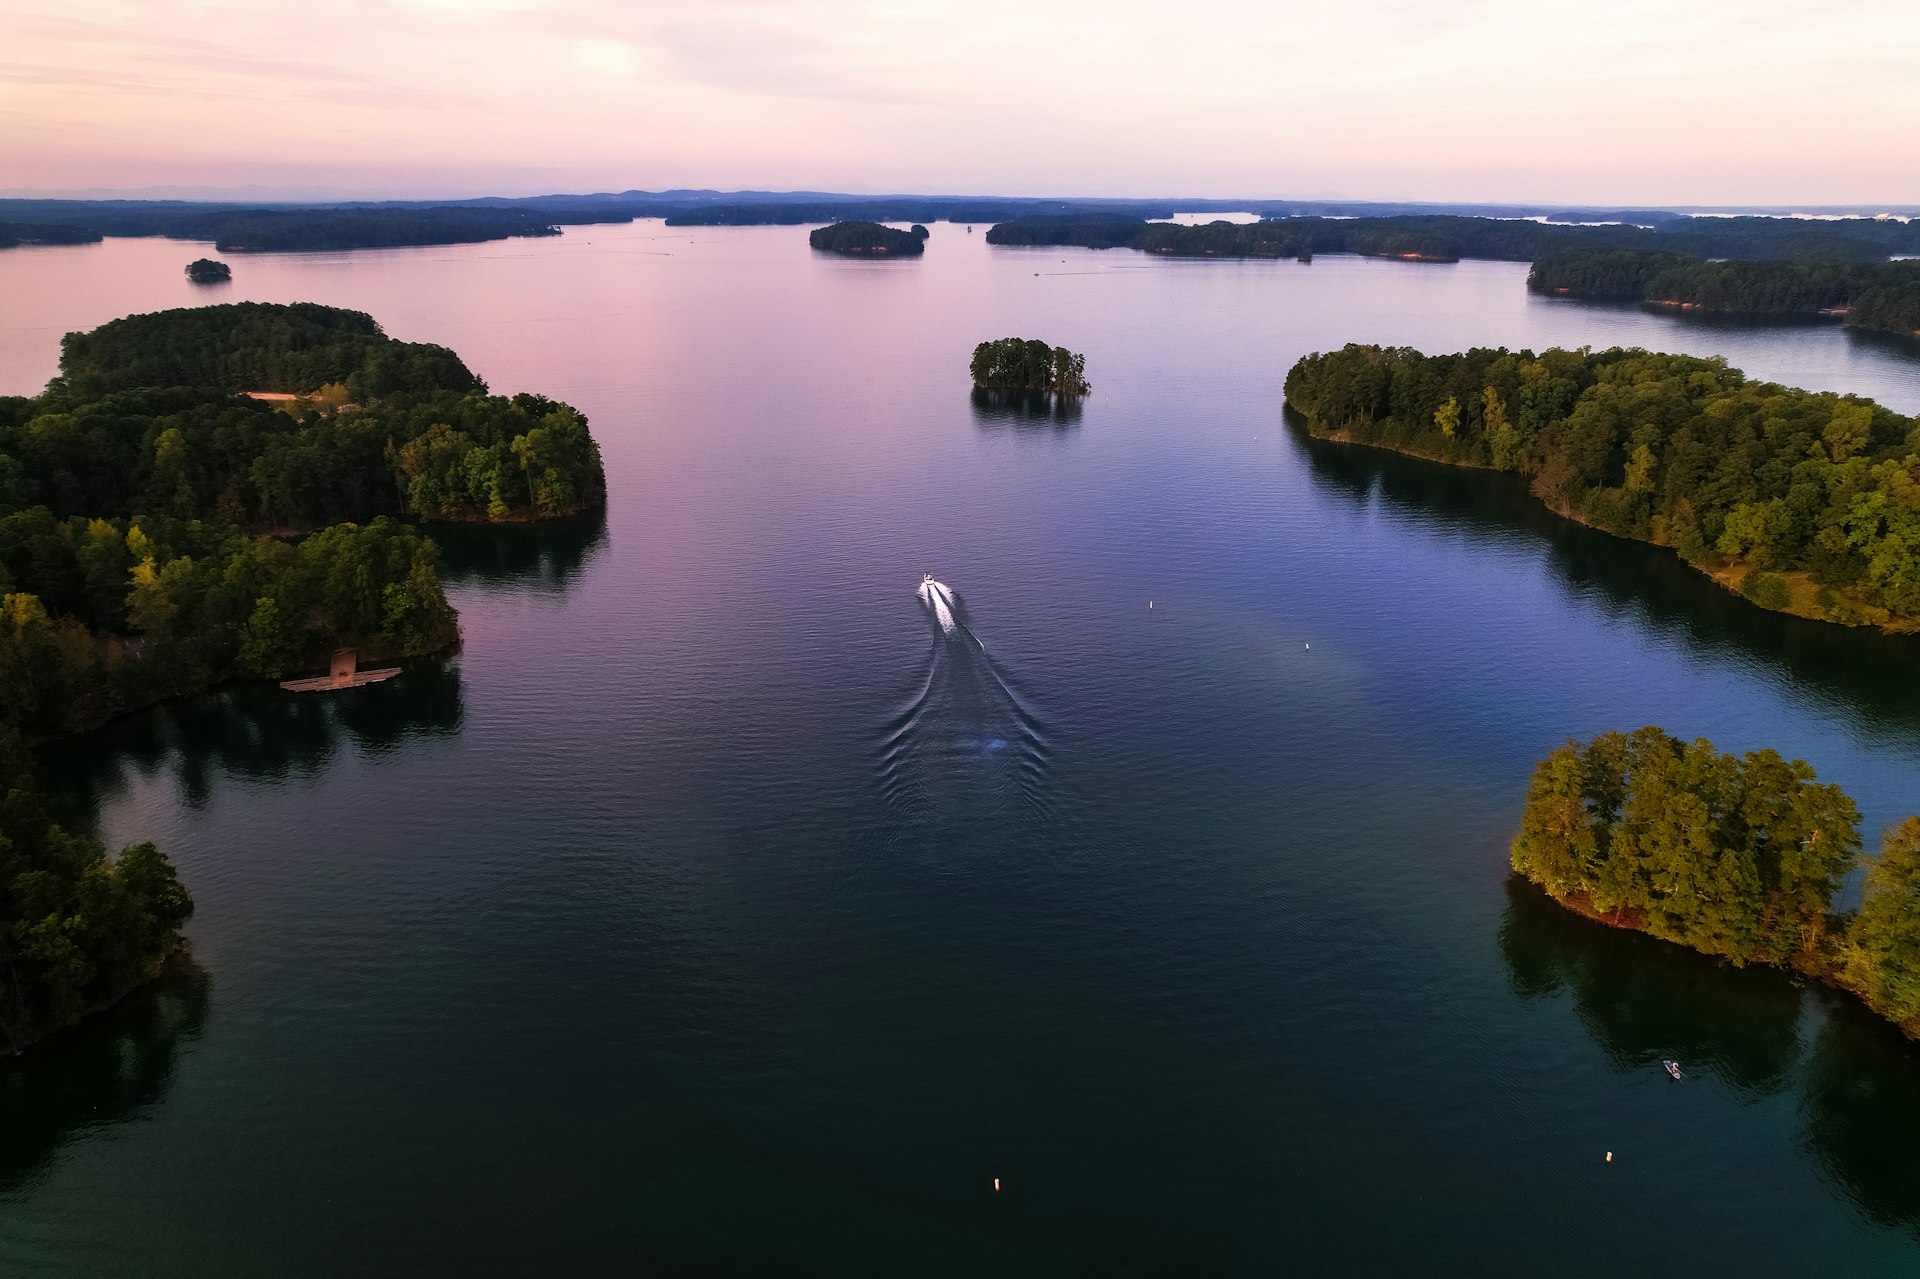 An aerial shot of a motorboat on Lake Lanier, Georgia, at dusk